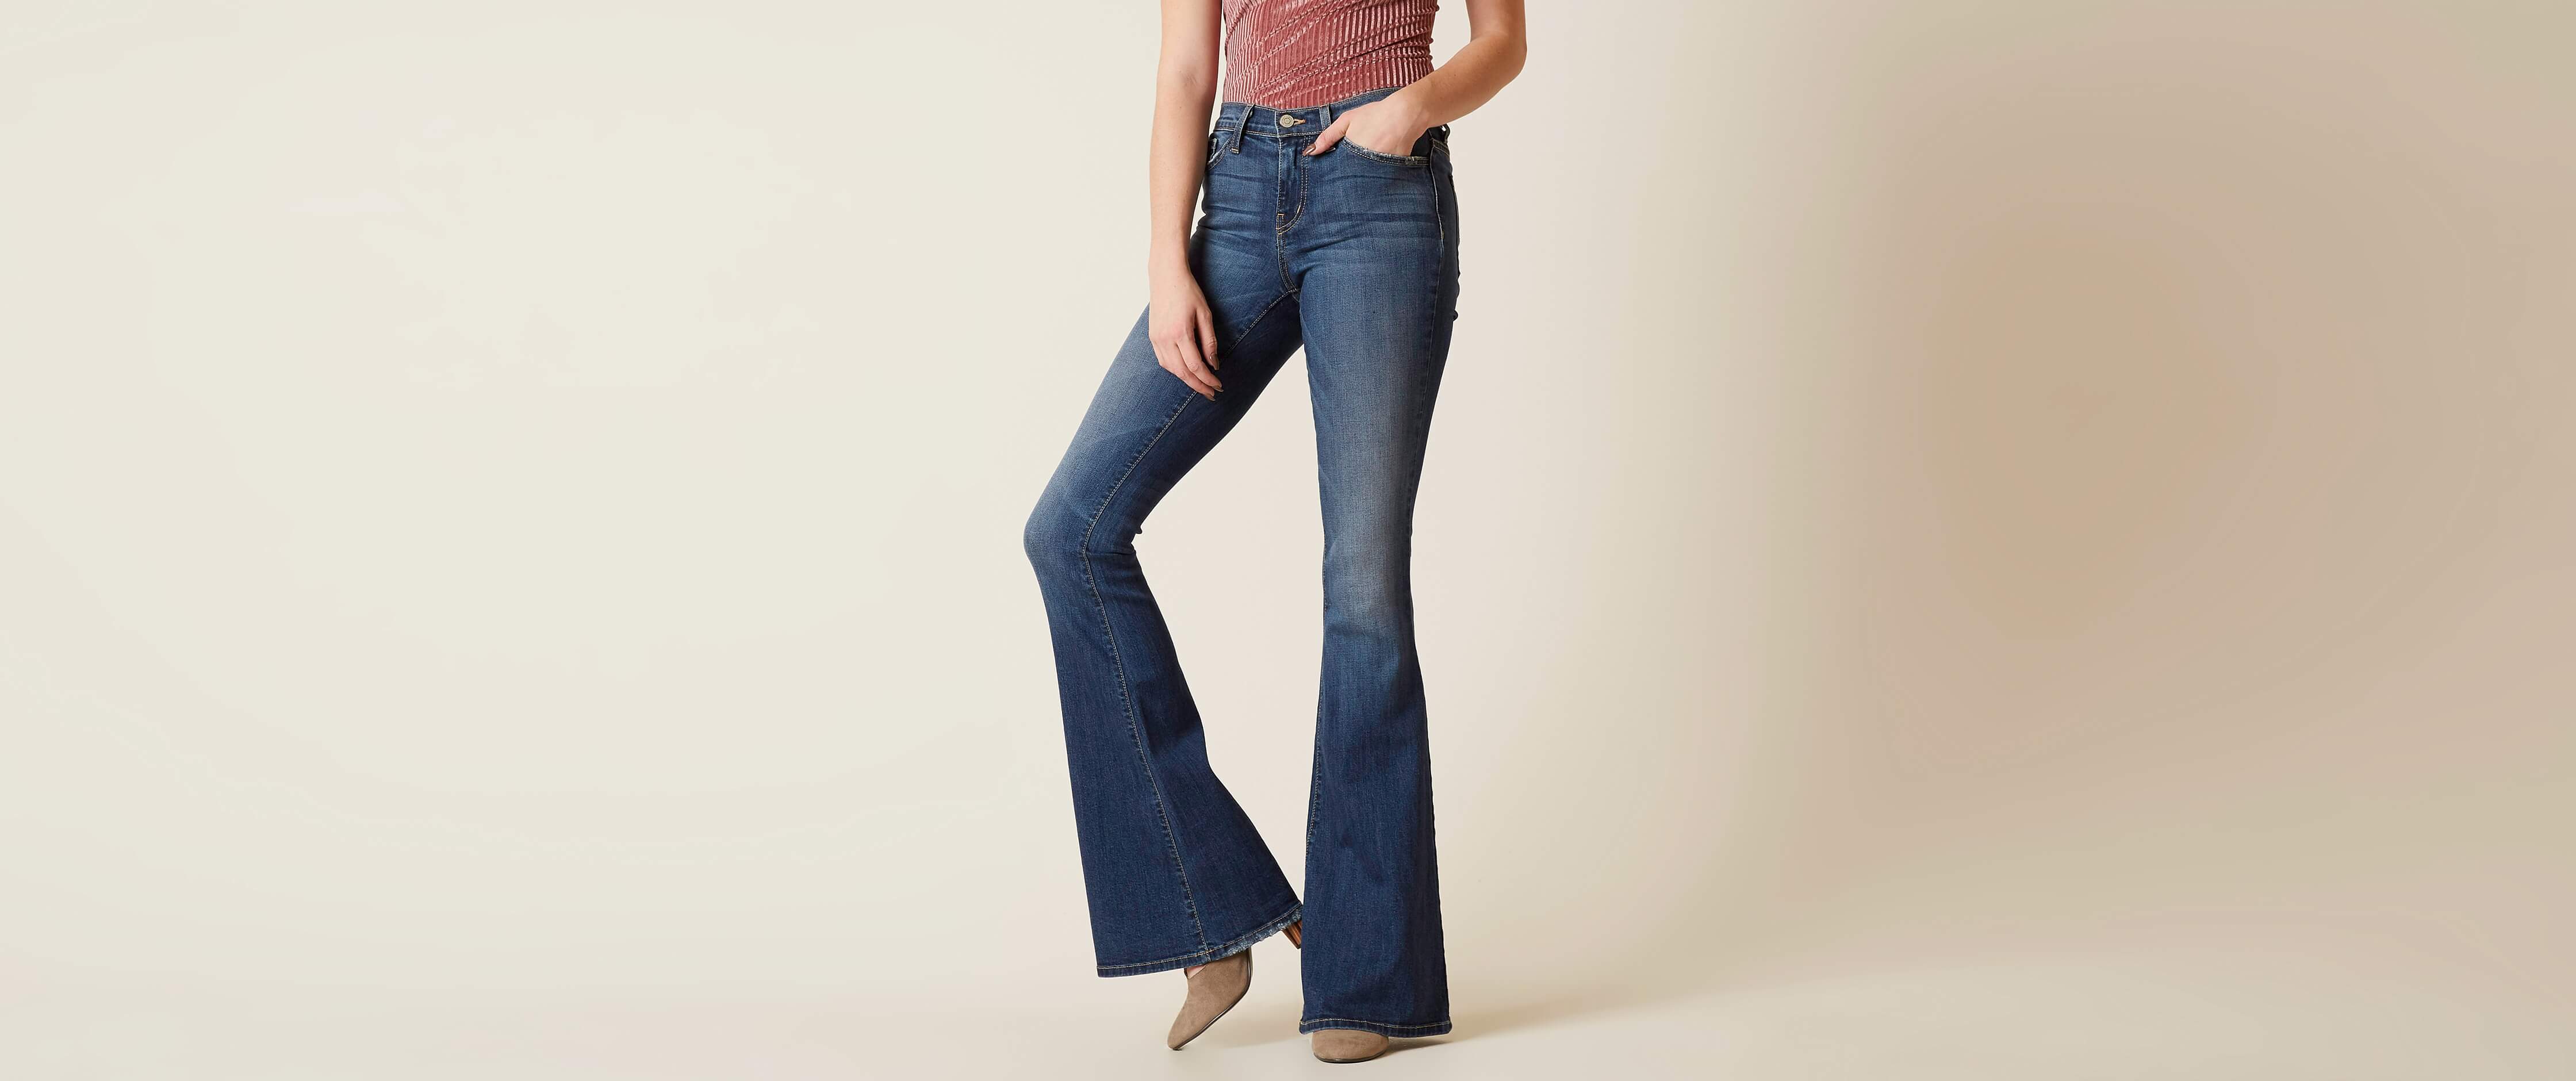 levi's 504 slouch straight women's jeans